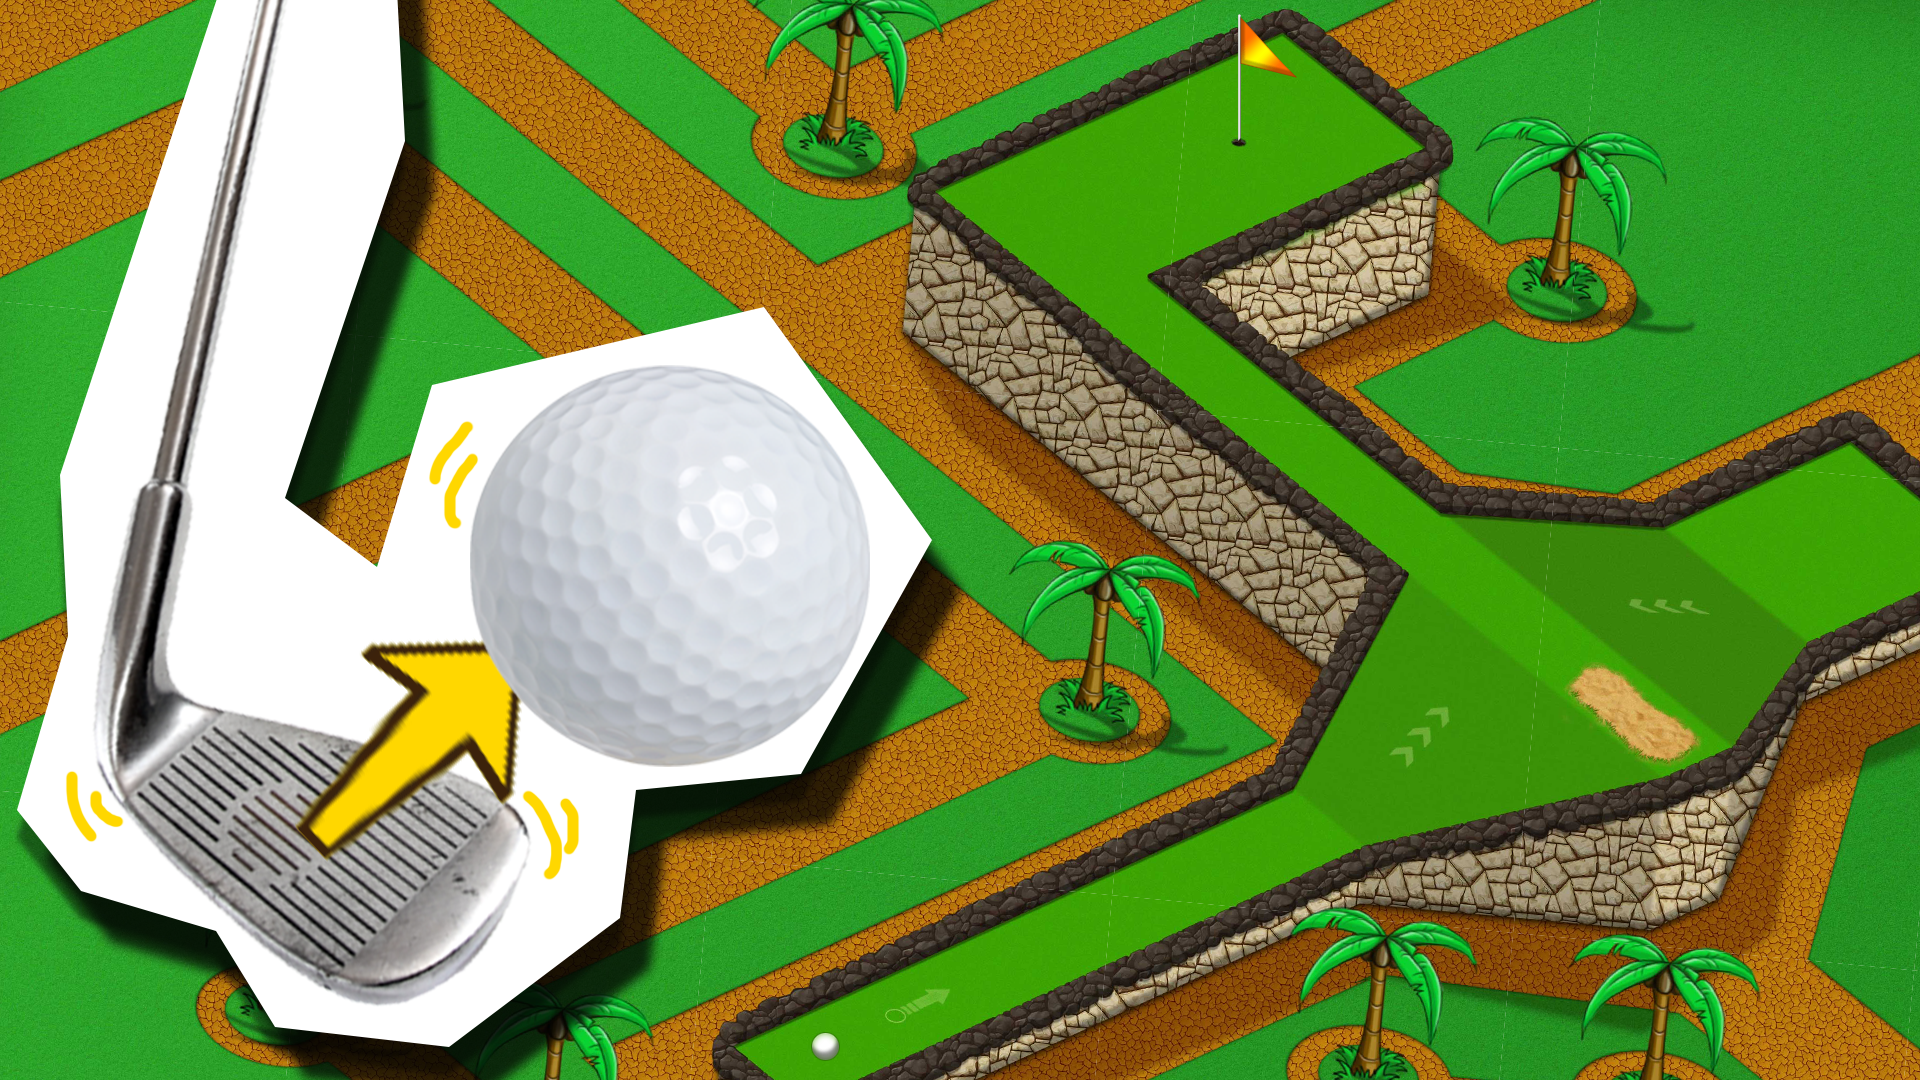 Let's Play Golf!